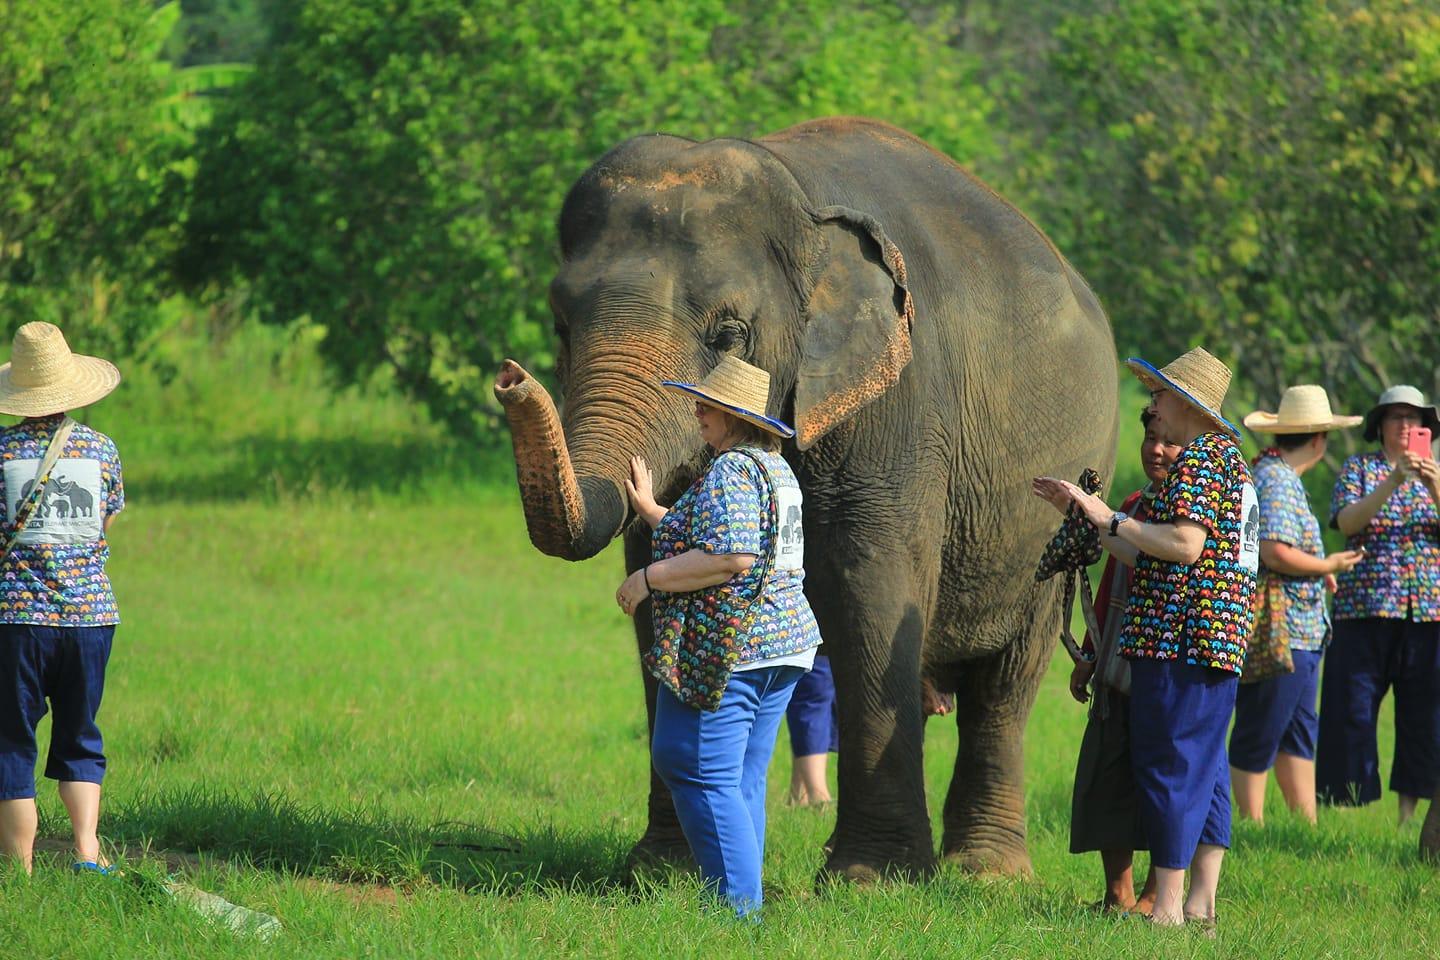 A group of 6 people wearing straw hats and light clothing are standing next to an elephant. The woman in the center is petting the elephant's trunk.